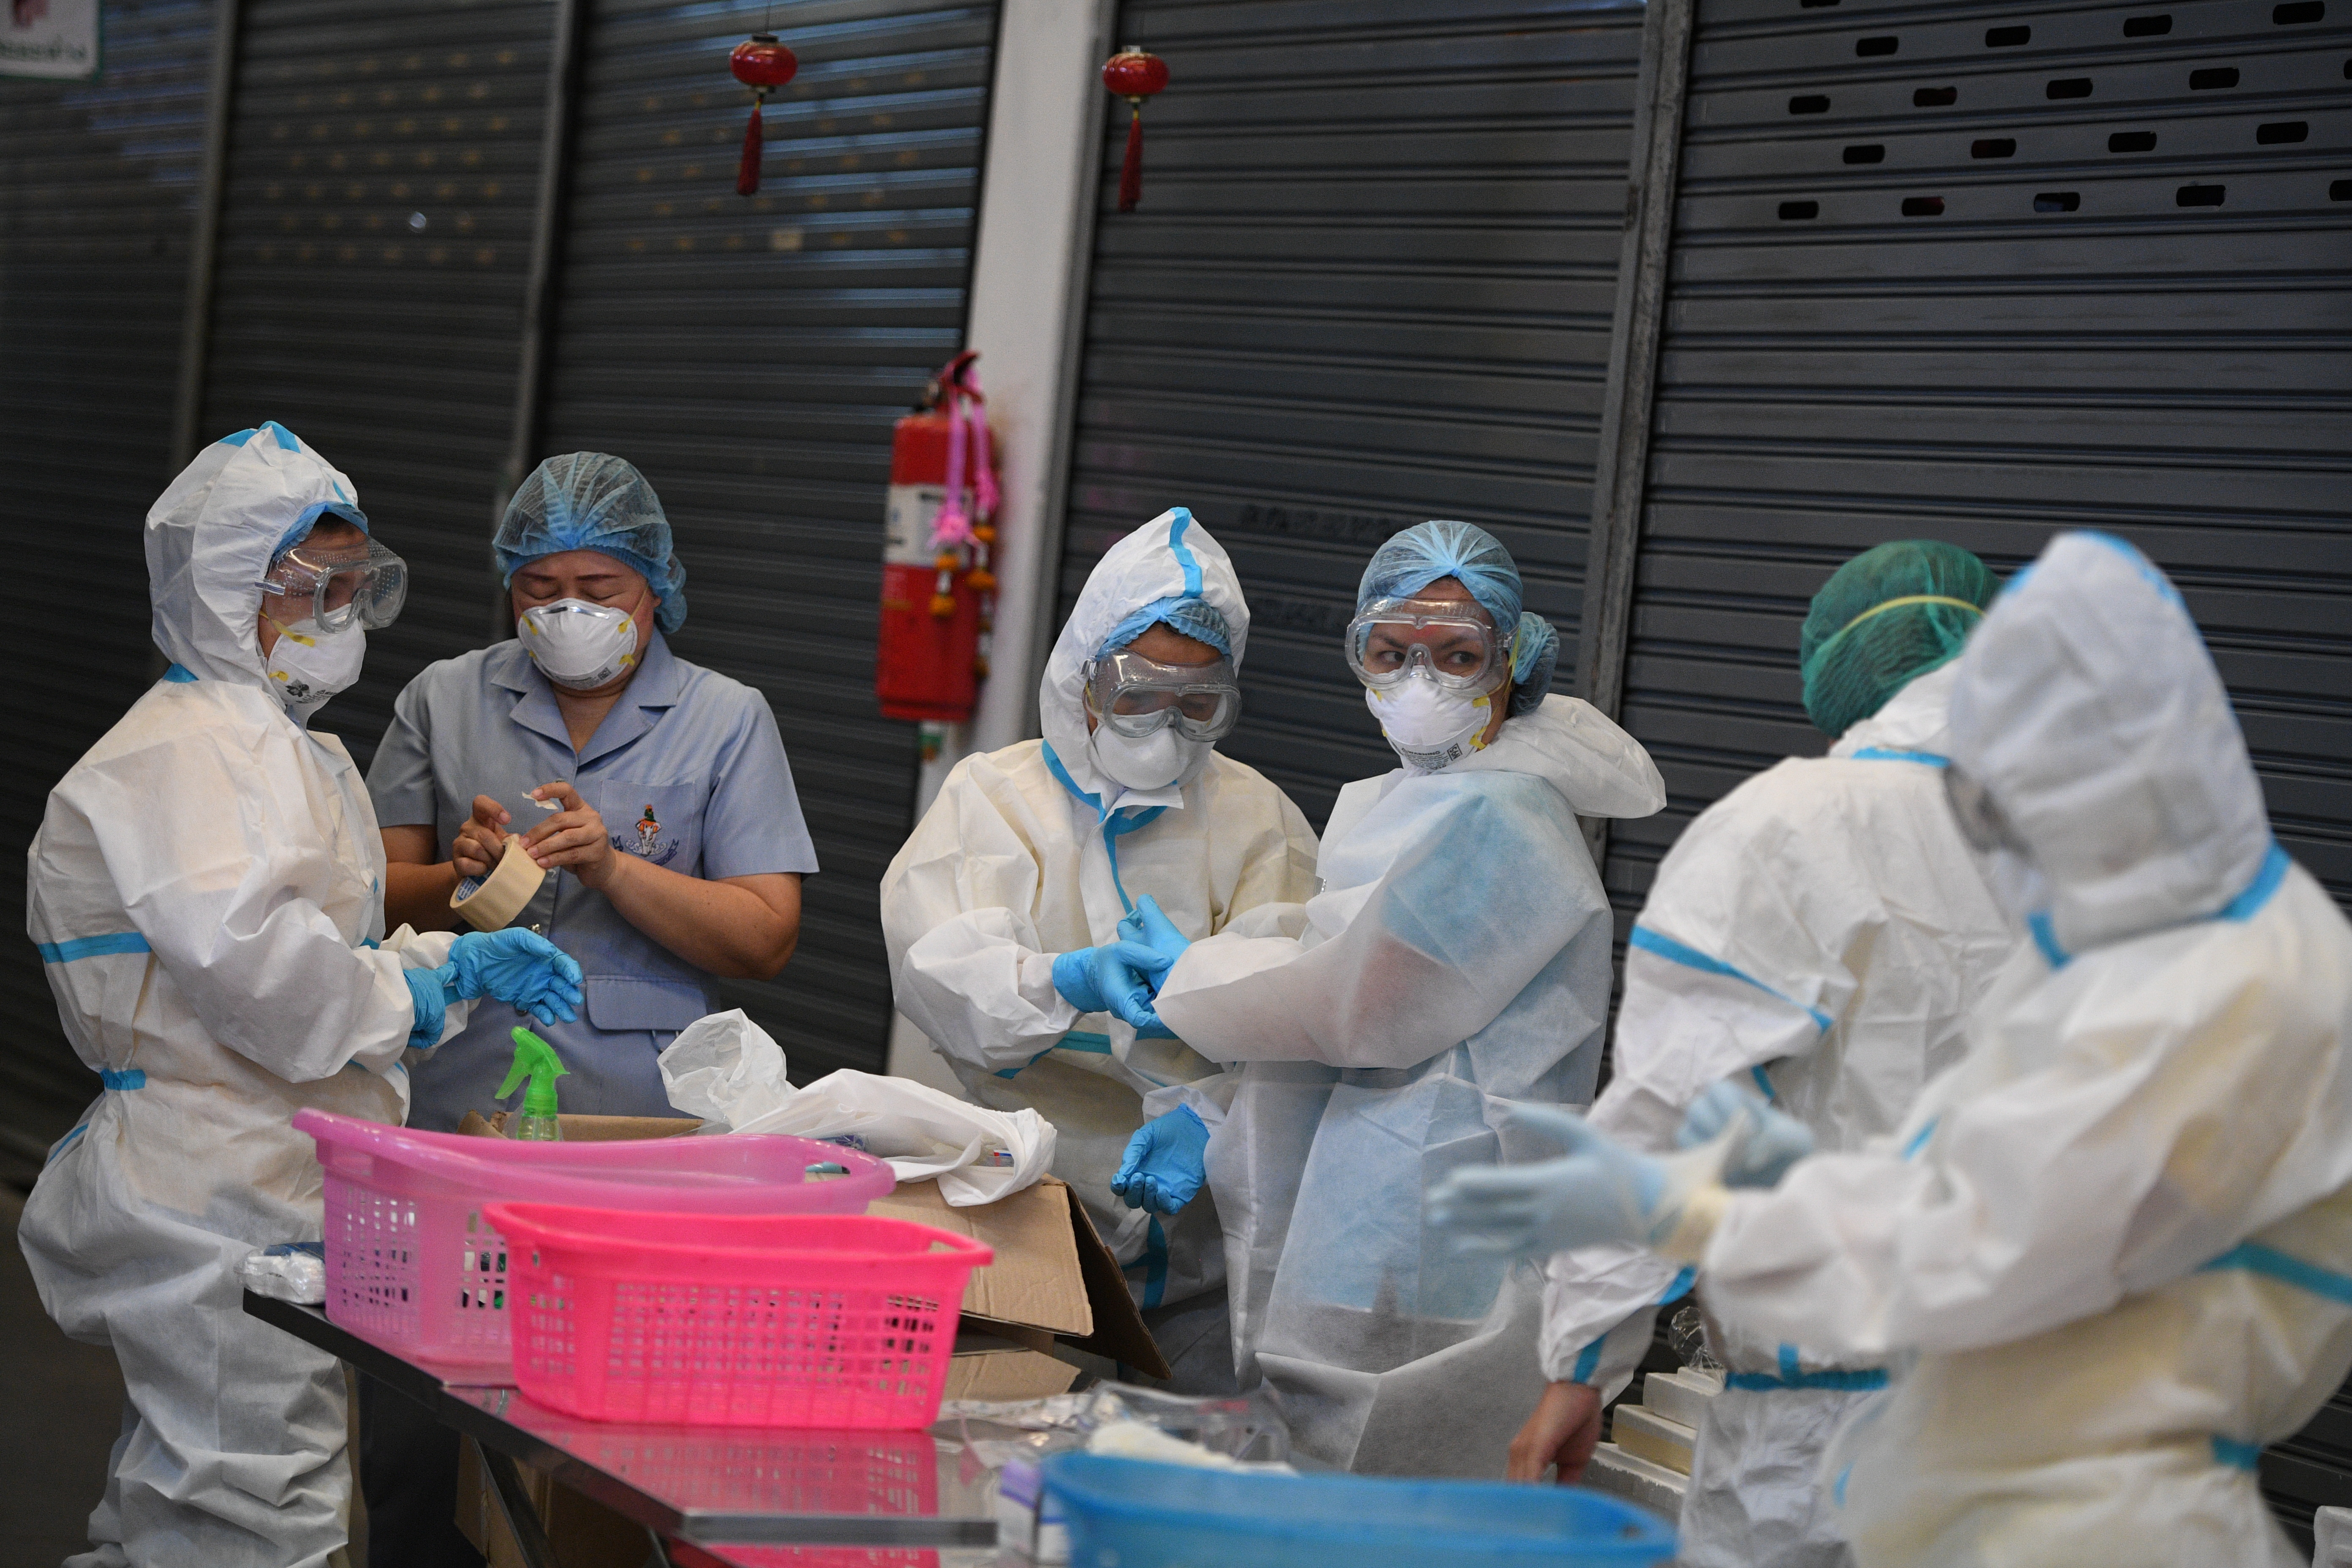 Health workers get ready to collect samples for further testing at Thanon Mitr Market in Bangkok